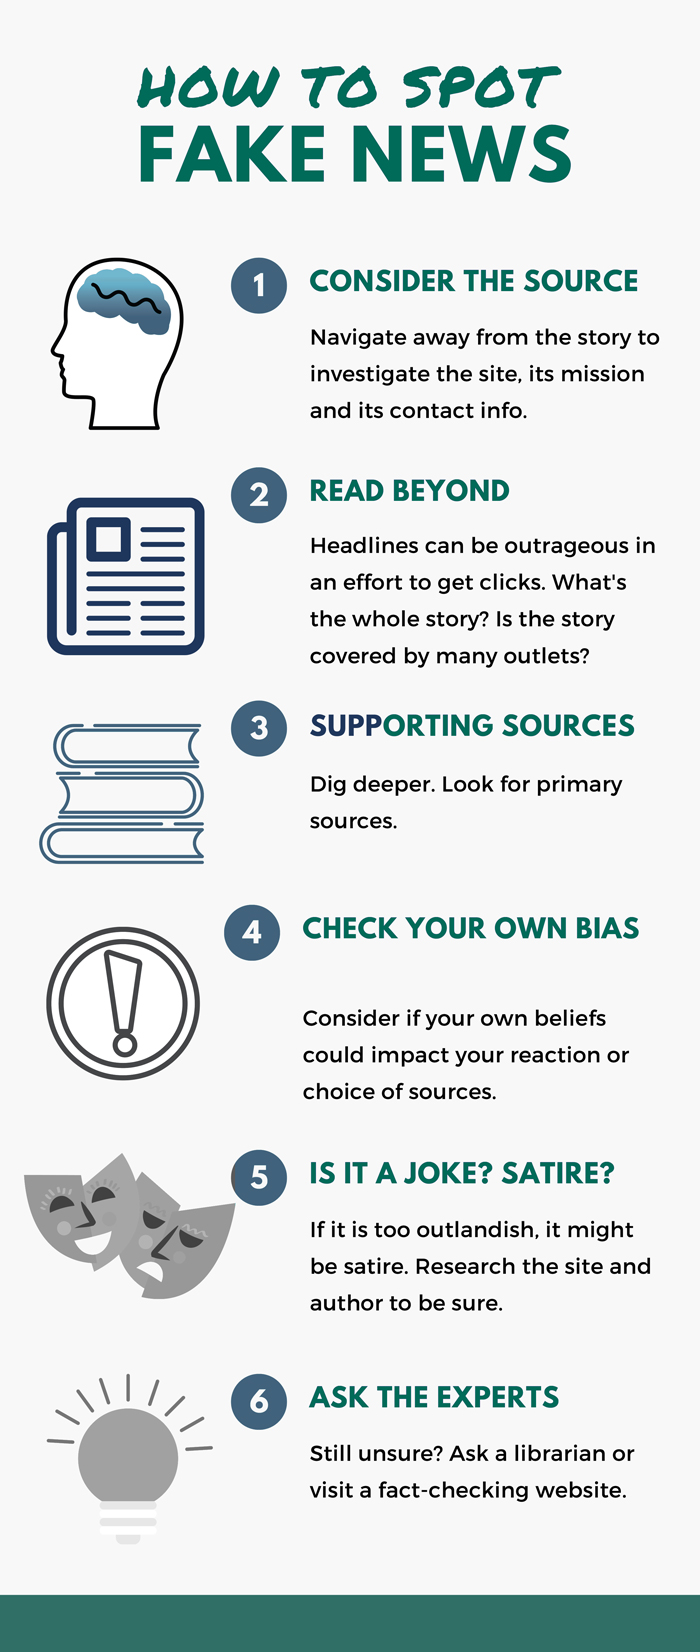 How to Spot Fake News infographic